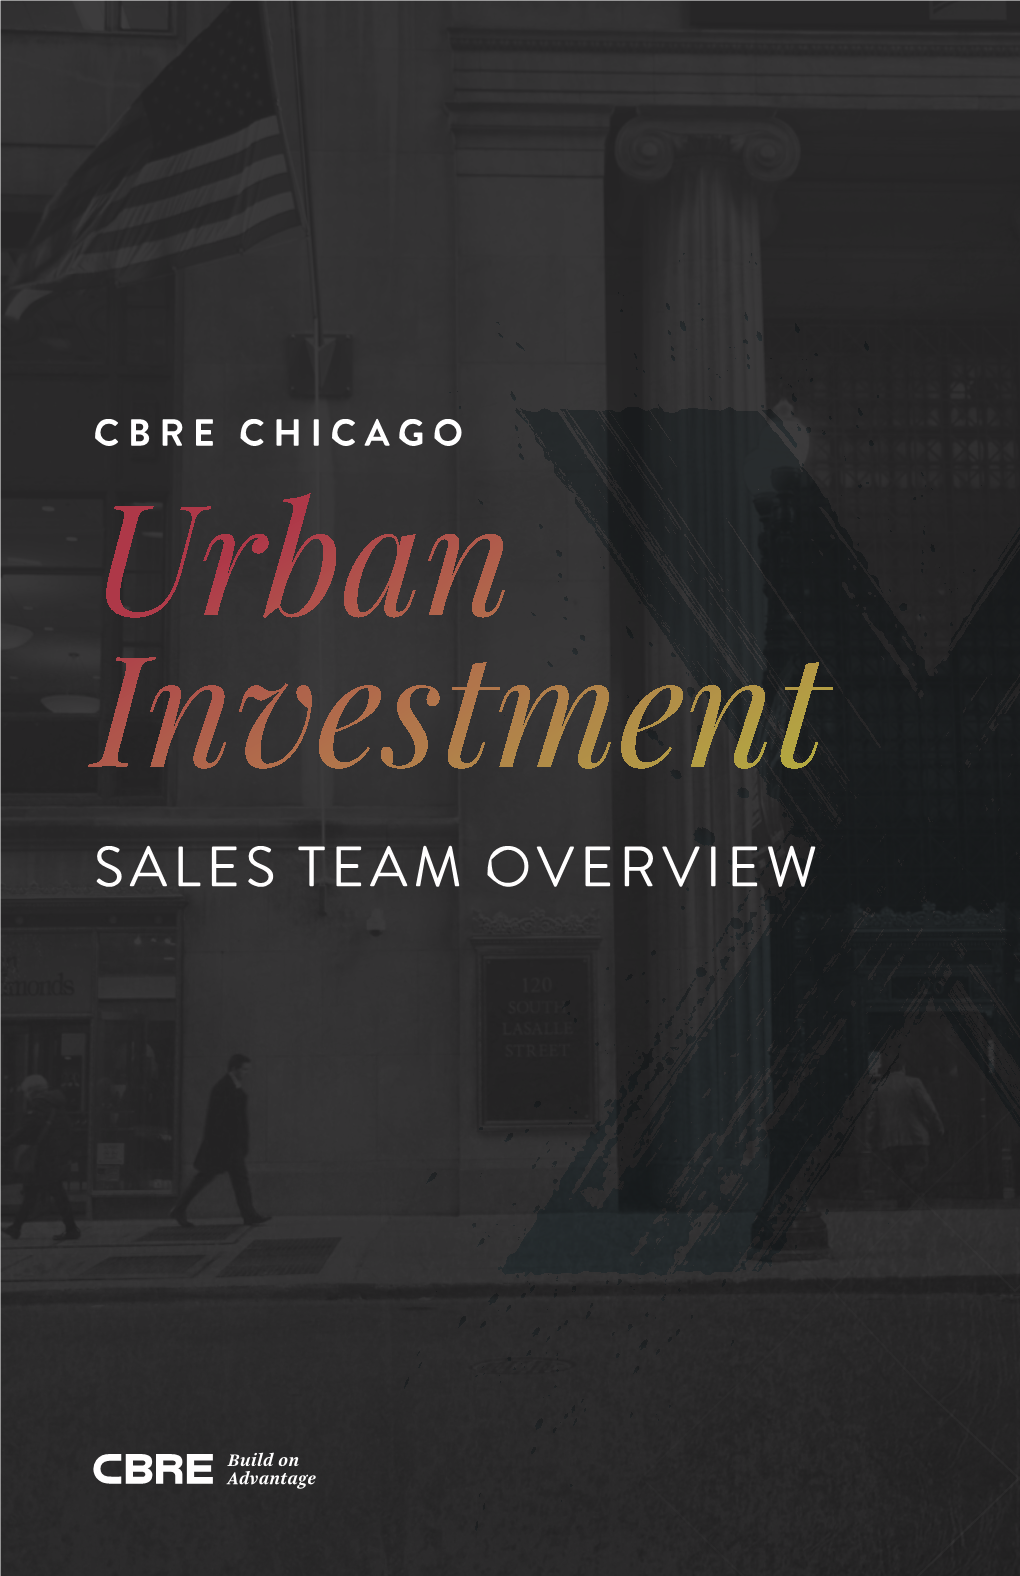 Urban Investment SALES TEAM OVERVIEW in the News CHICAGO TEAM ACCOLADES